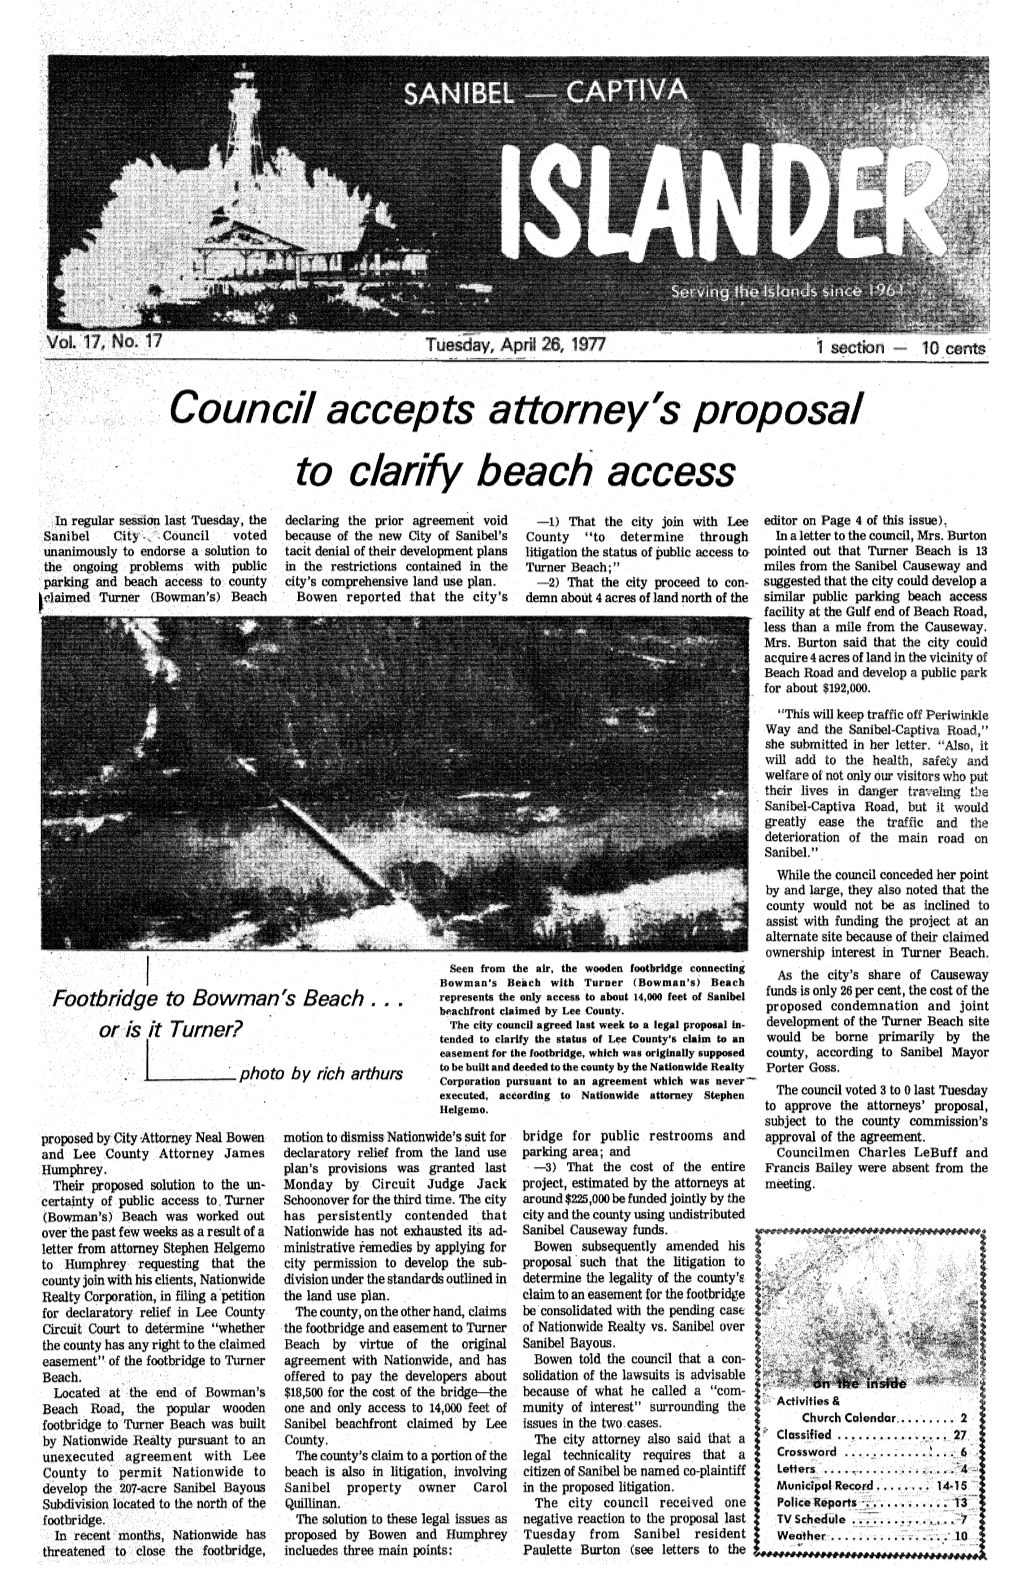 Council Accepts Attorney's Proposal to Clarify Beach Access